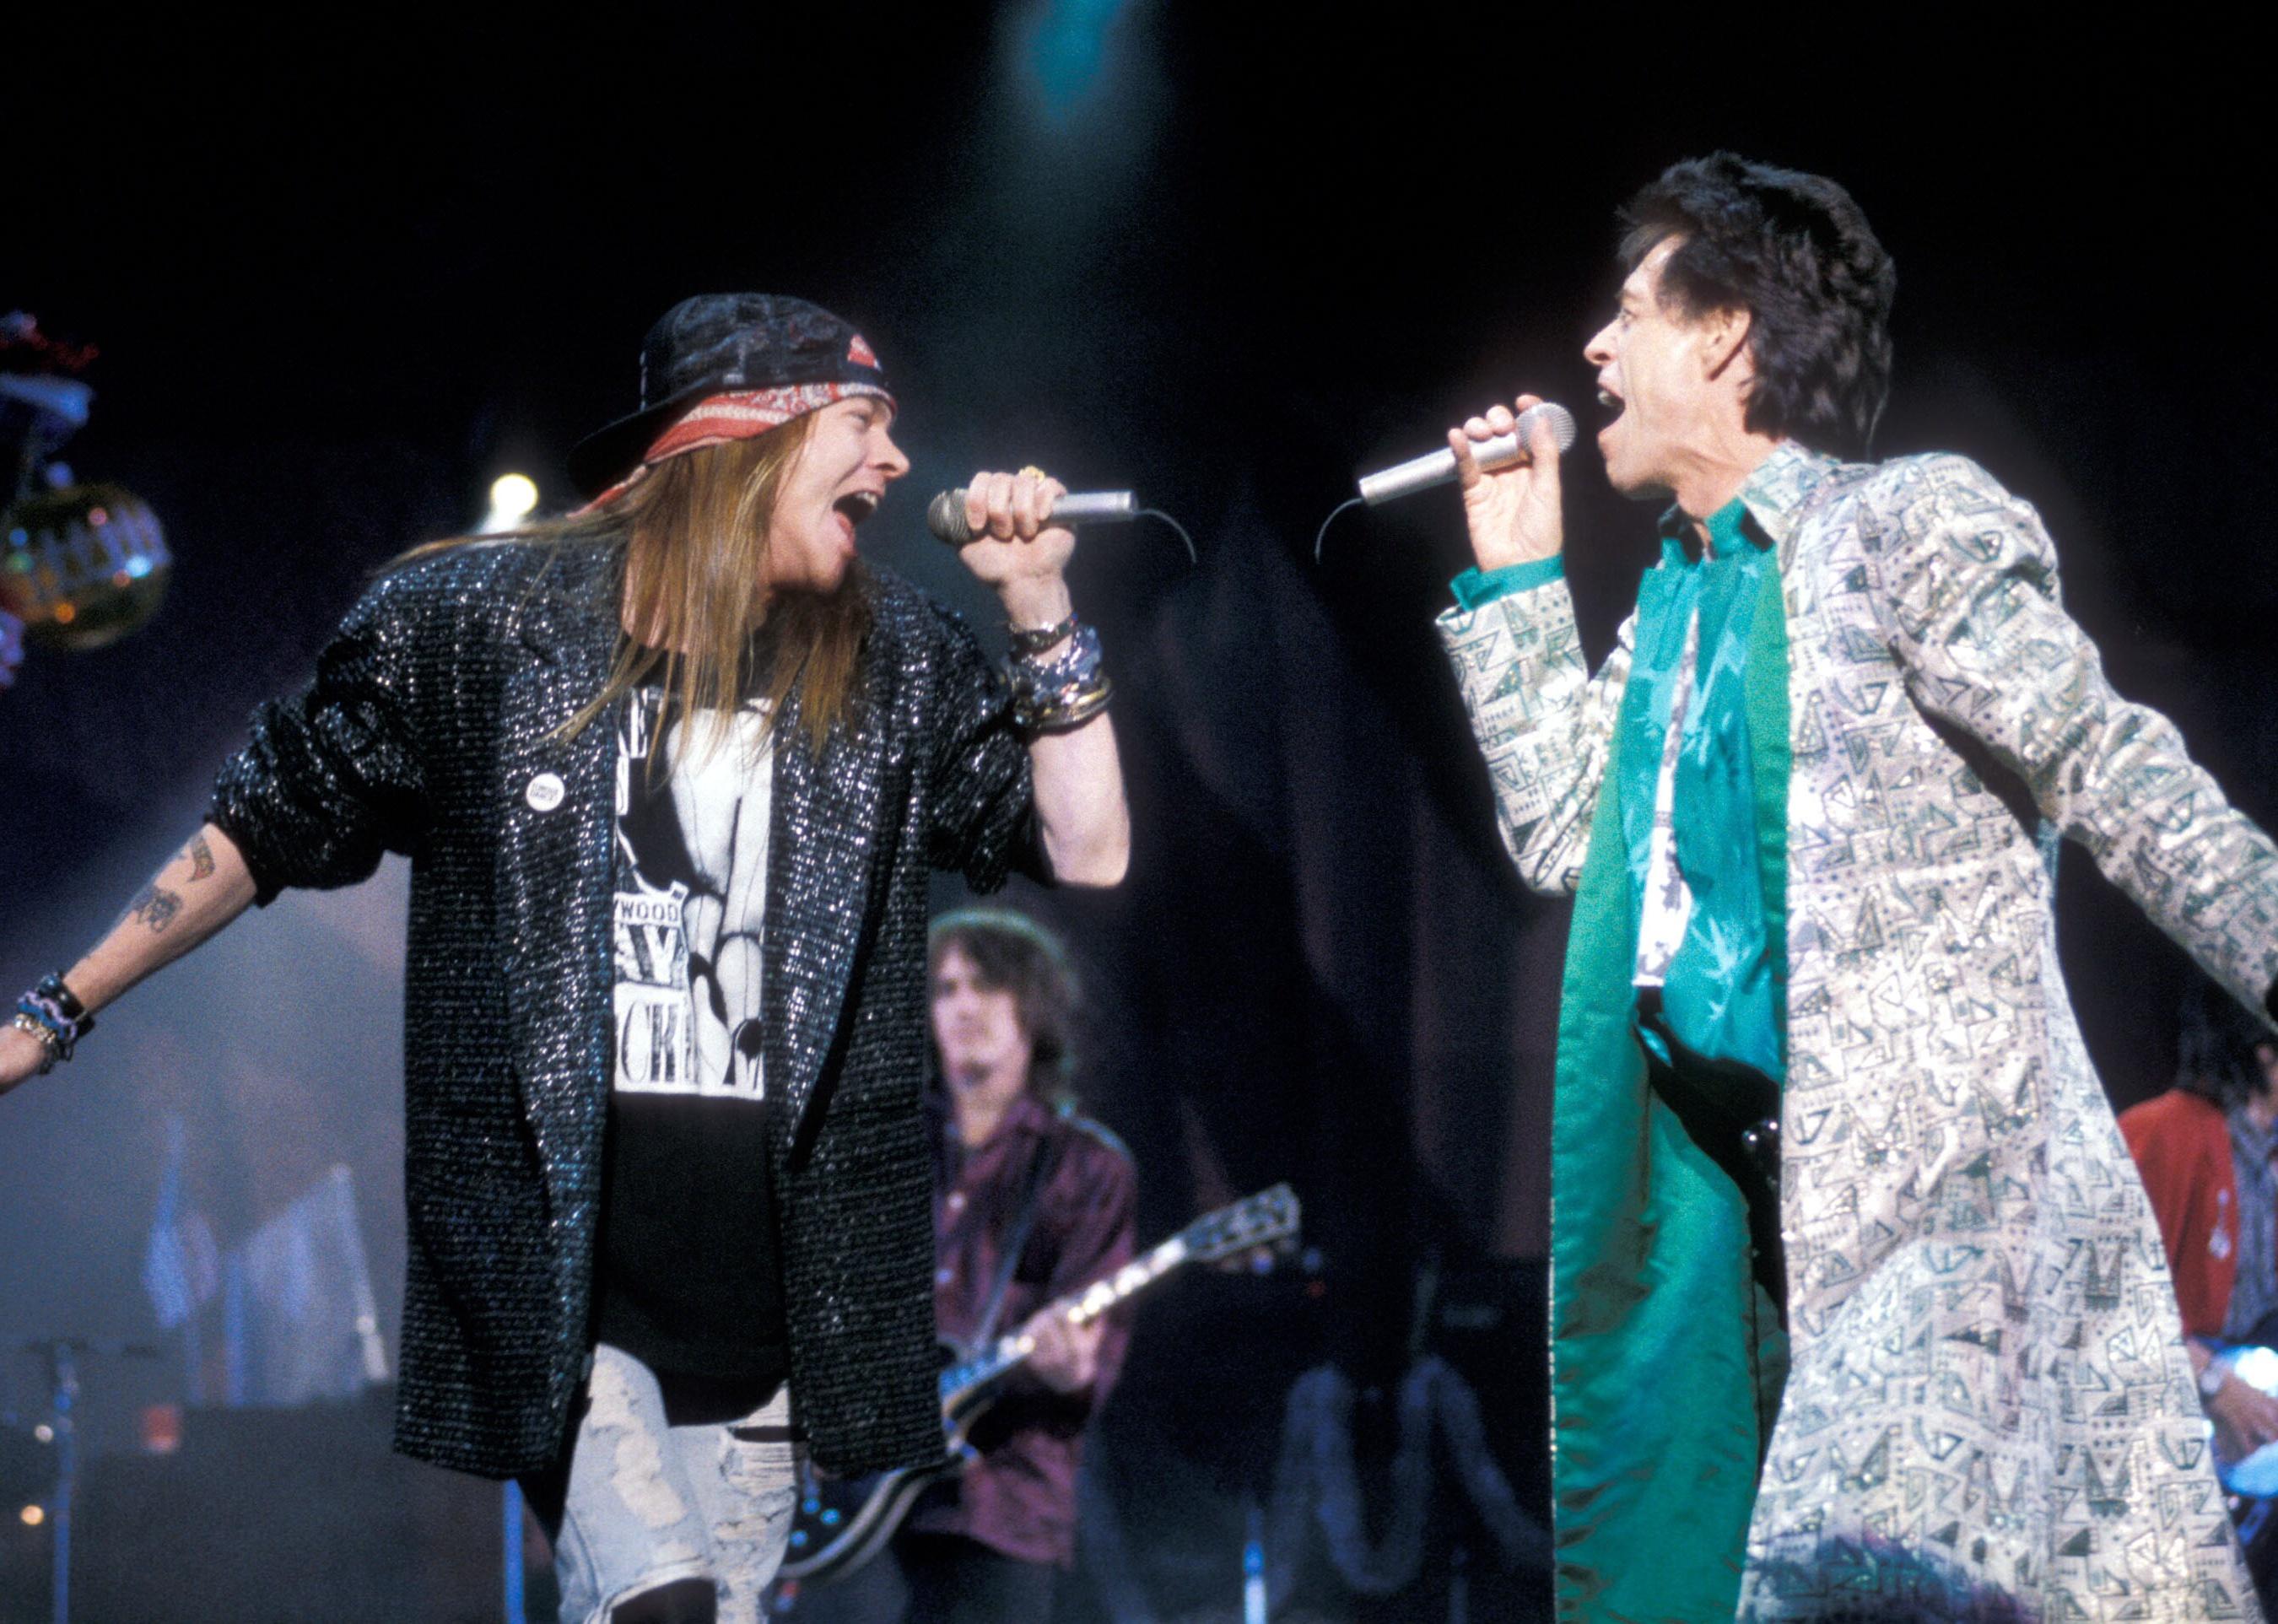 Axl Rose of Guns N' Roses and Mick Jagger of the Rolling Stones performing.